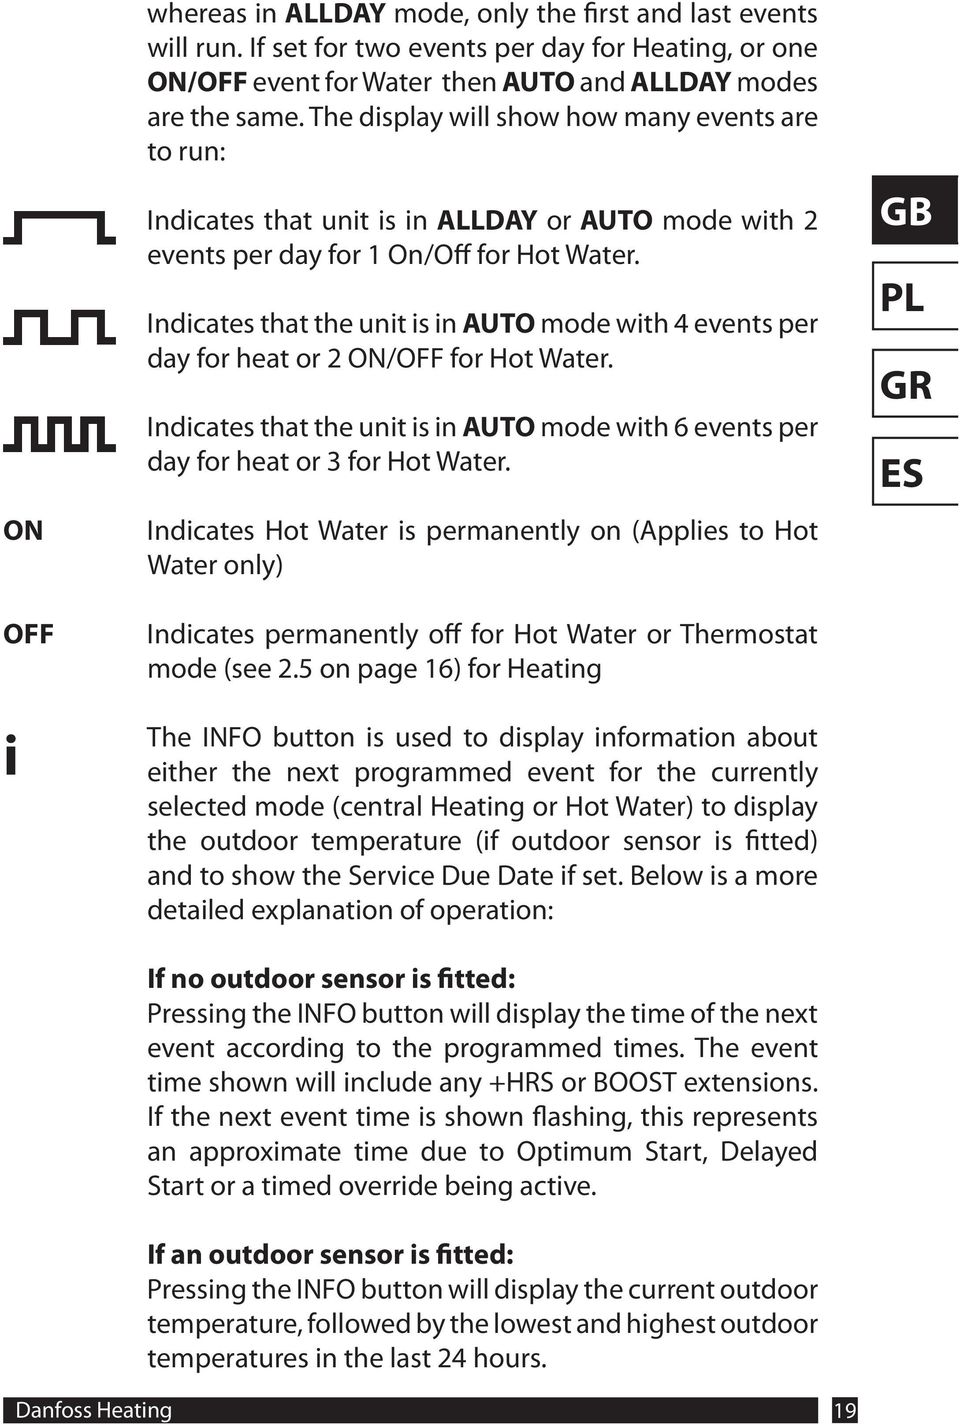 Indicates that the unit is in AUTO mode with 4 events per day for heat or 2 ON/OFF for Hot Water. Indicates that the unit is in AUTO mode with 6 events per day for heat or 3 for Hot Water.